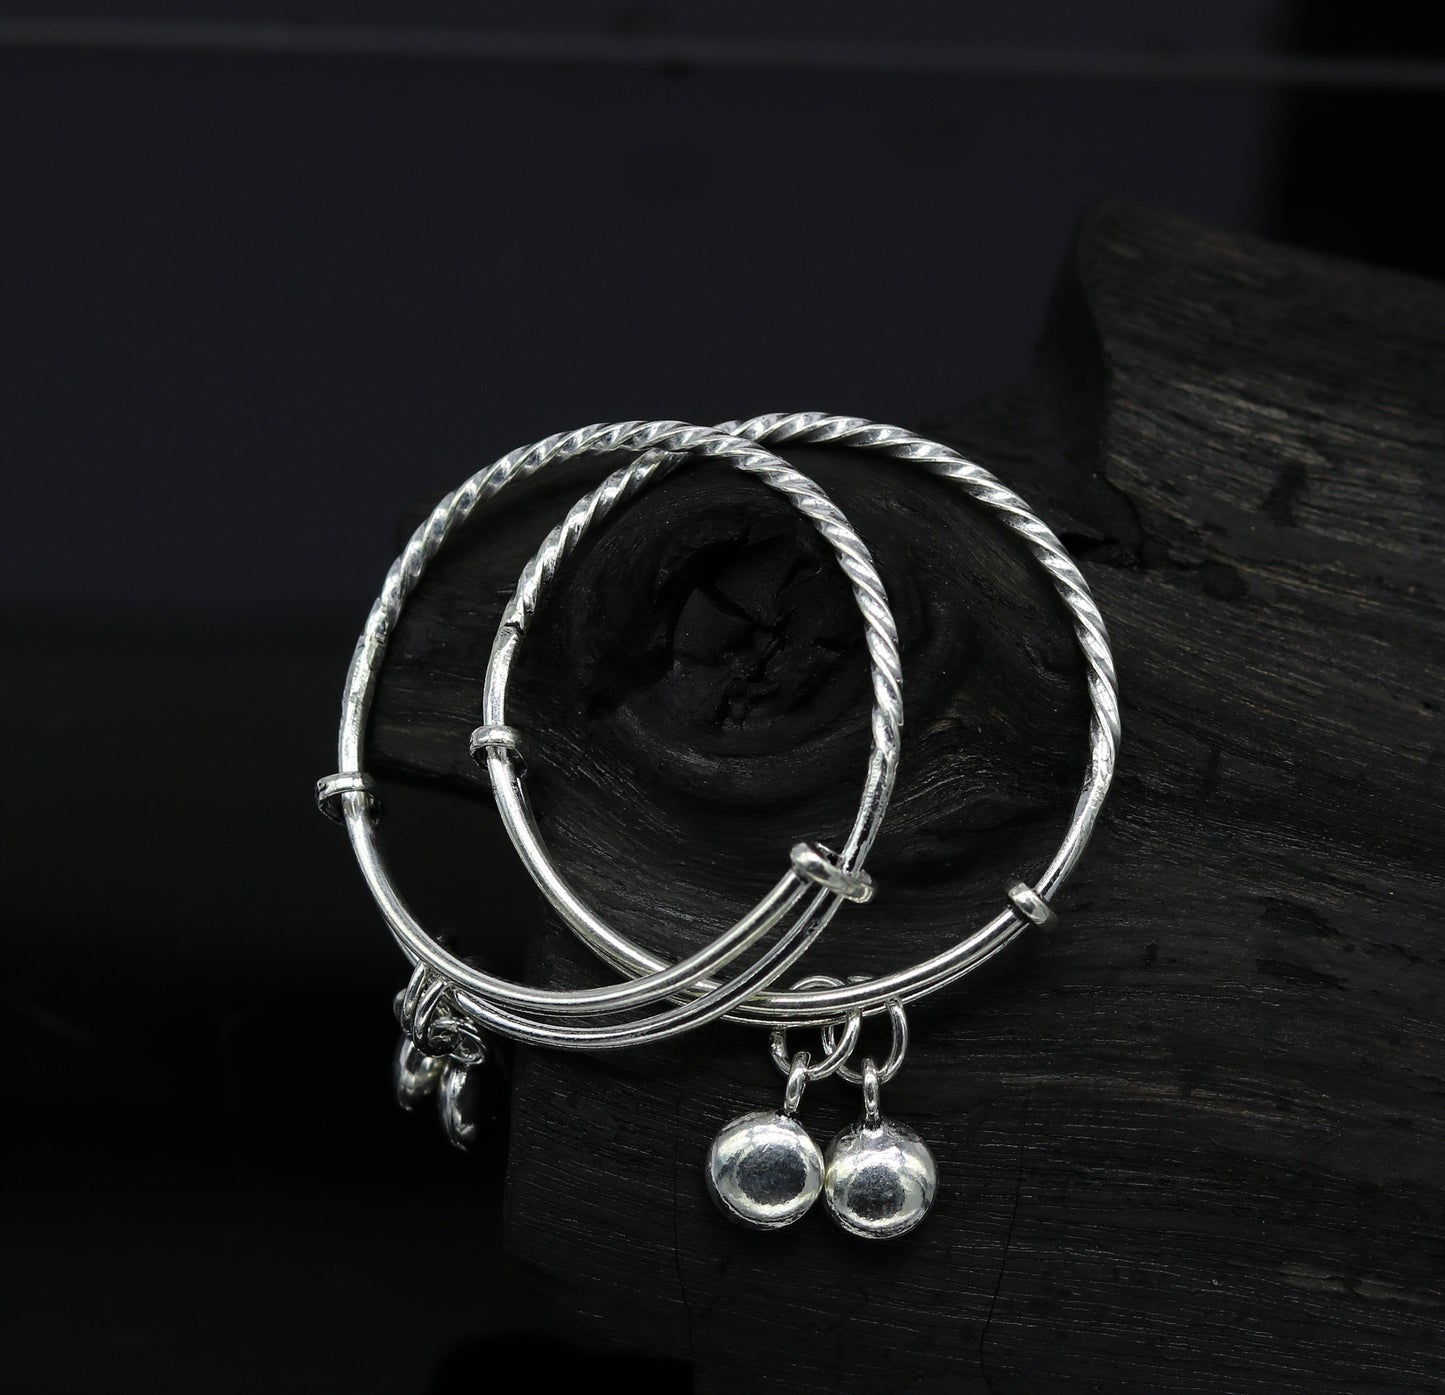 925 sterling silver handmade tribal twisted style baby bangles bracelet, unisex new born baby gifting kids jewelry tribal jewelry bbk79 - TRIBAL ORNAMENTS